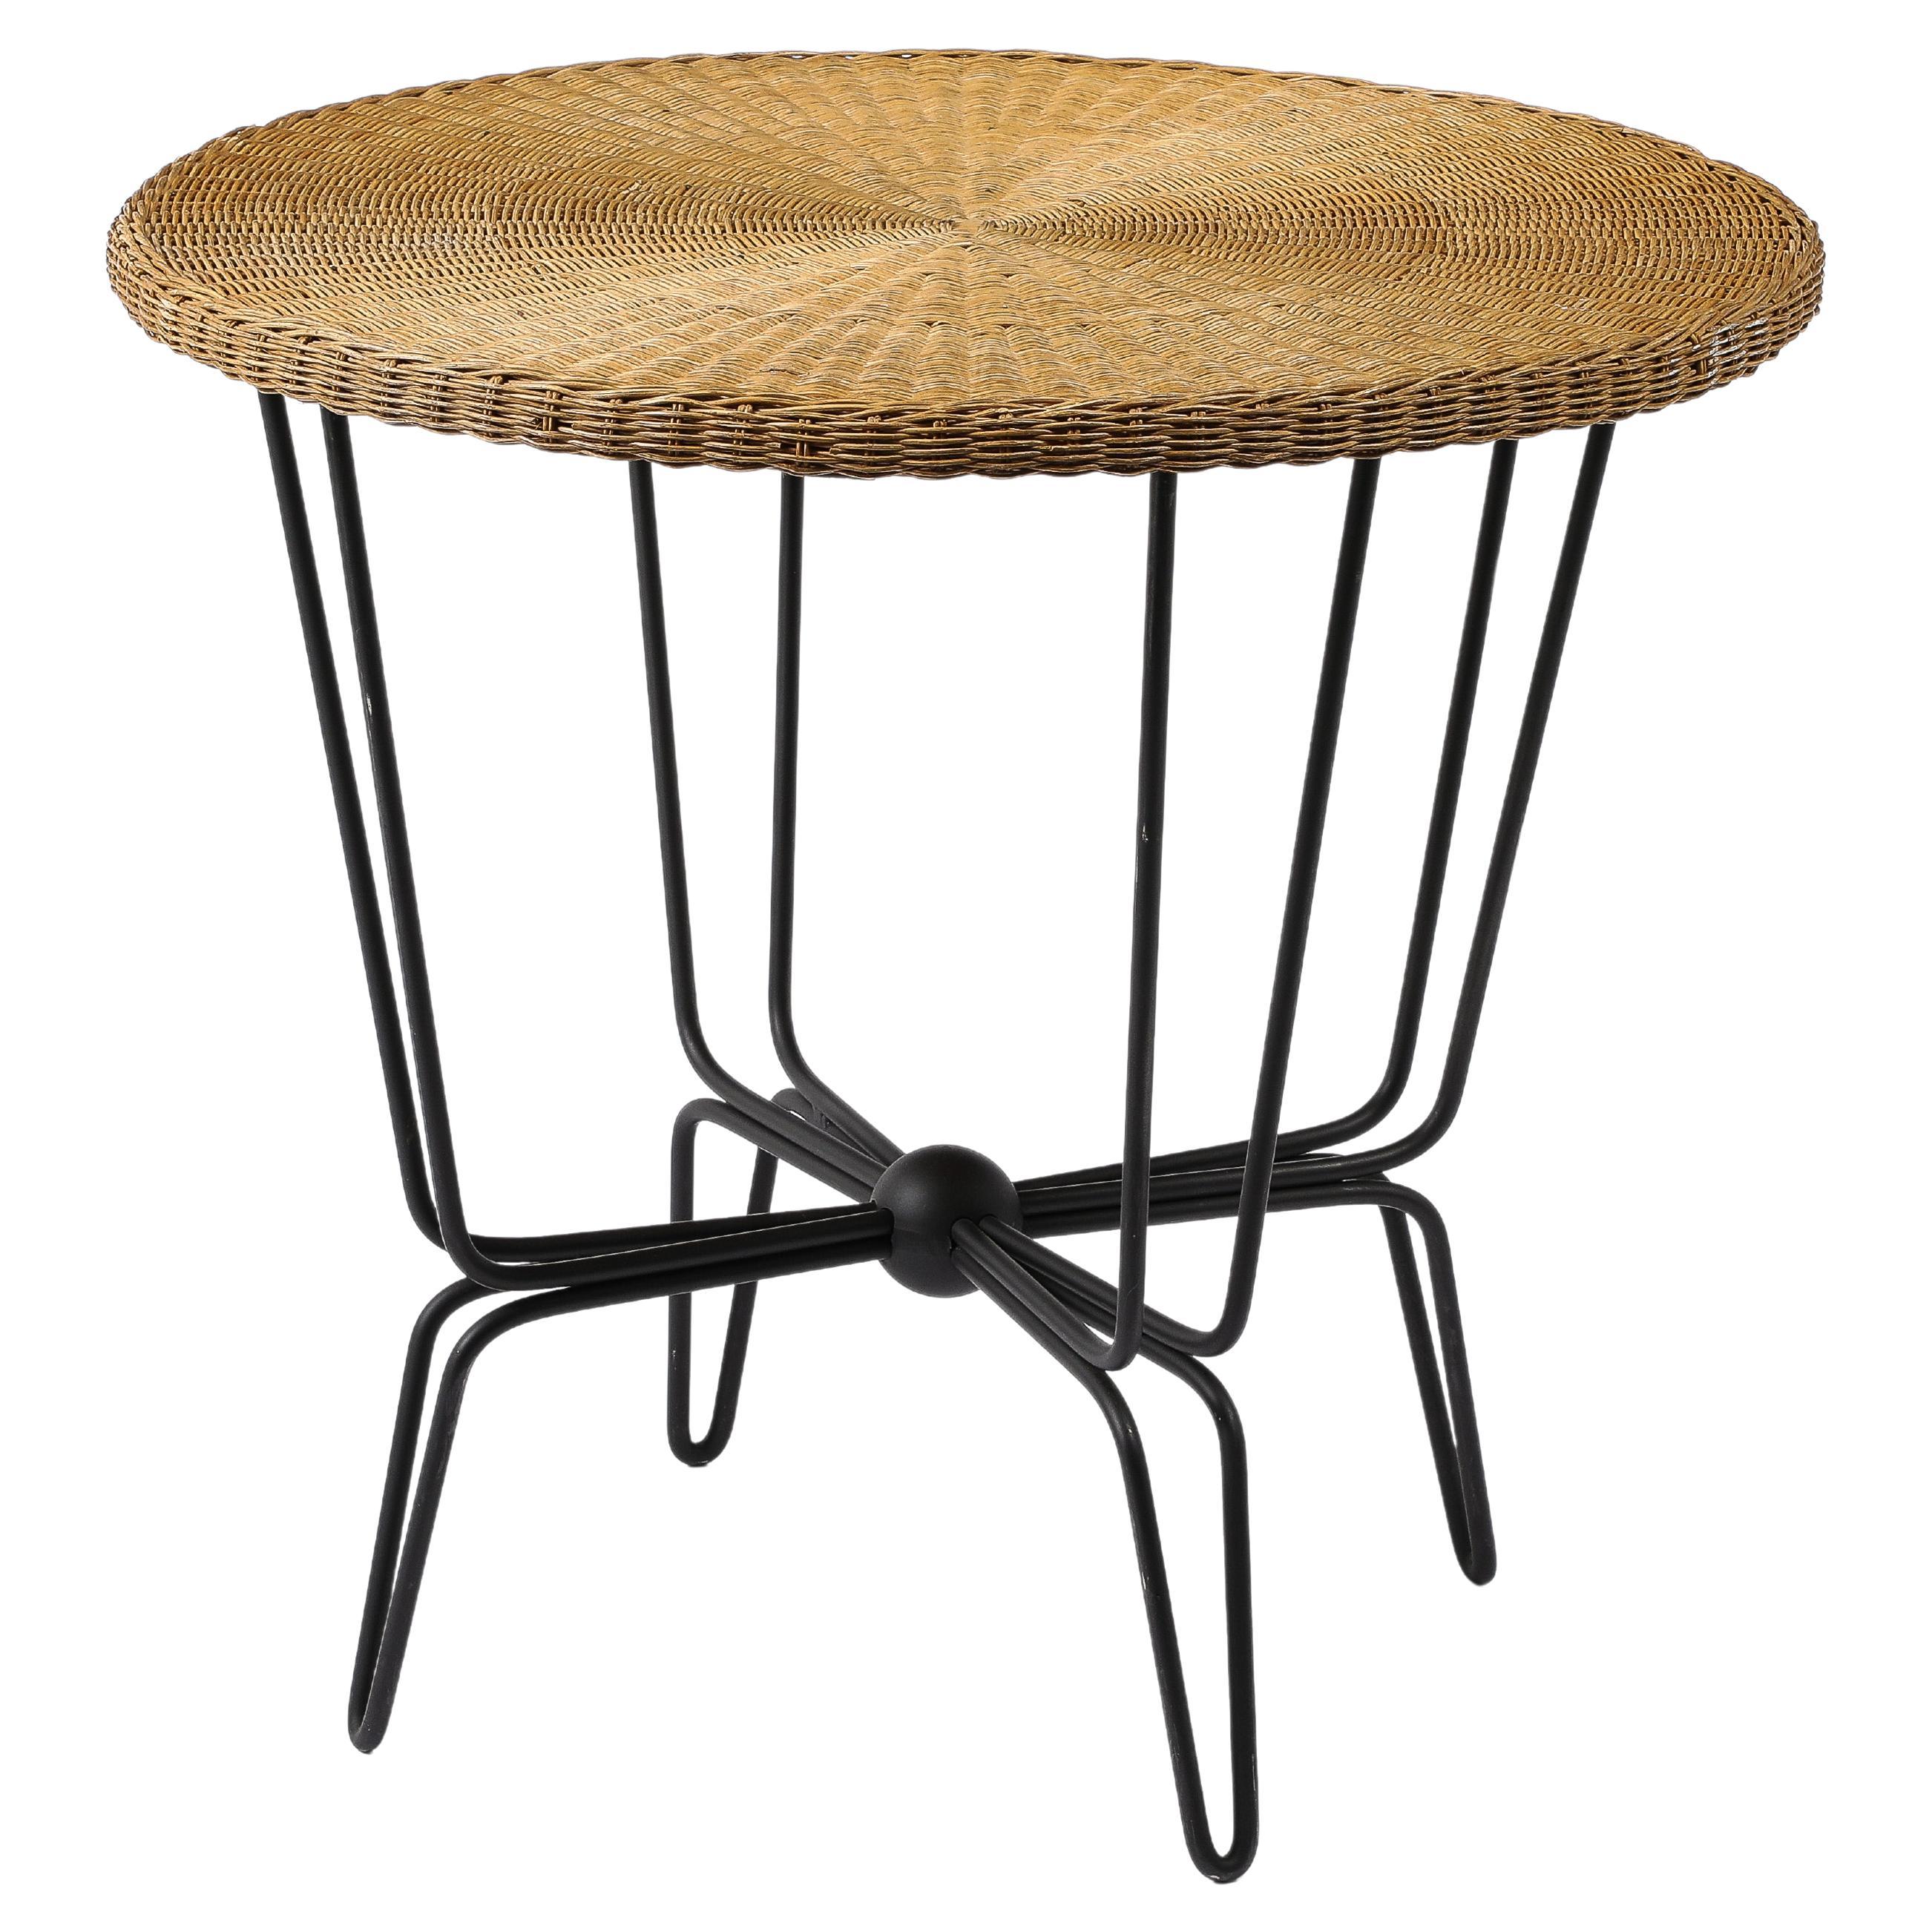 Mathieu Mategot Wrought Iron & Wicker Table, France 1950's For Sale